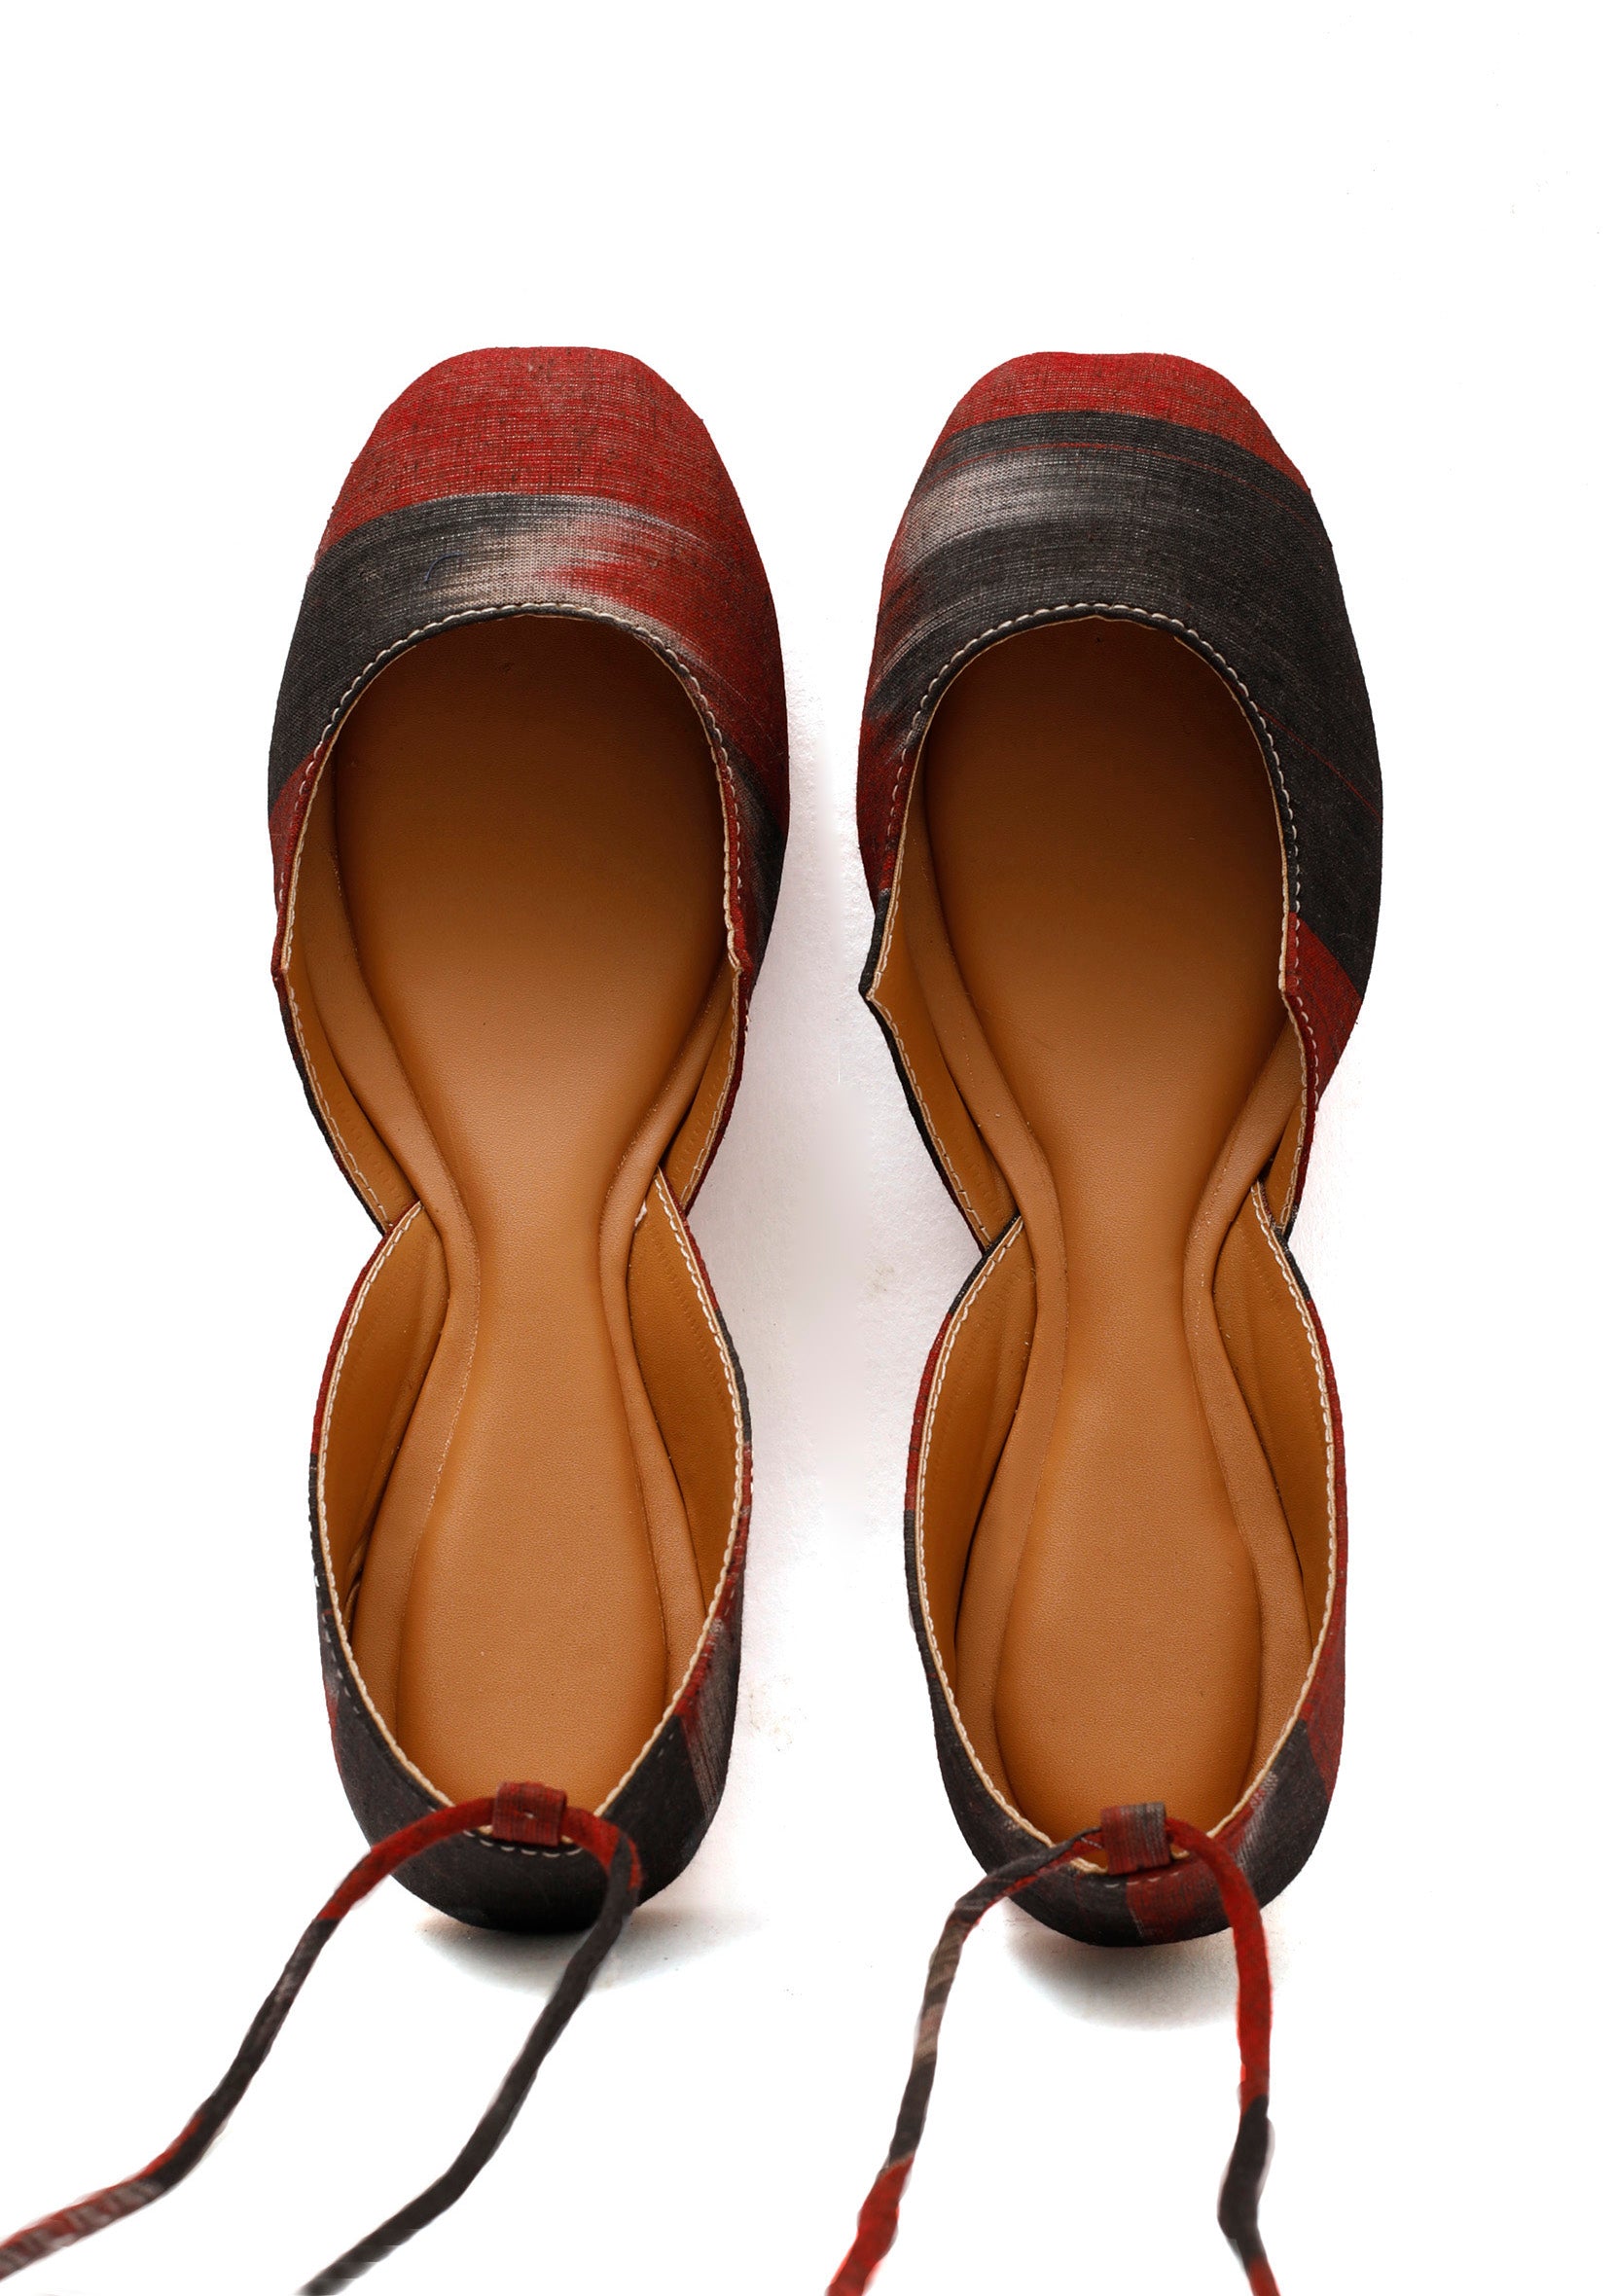 Red and Black Ikkat Cruelty Free Leather Flat Ballerinas